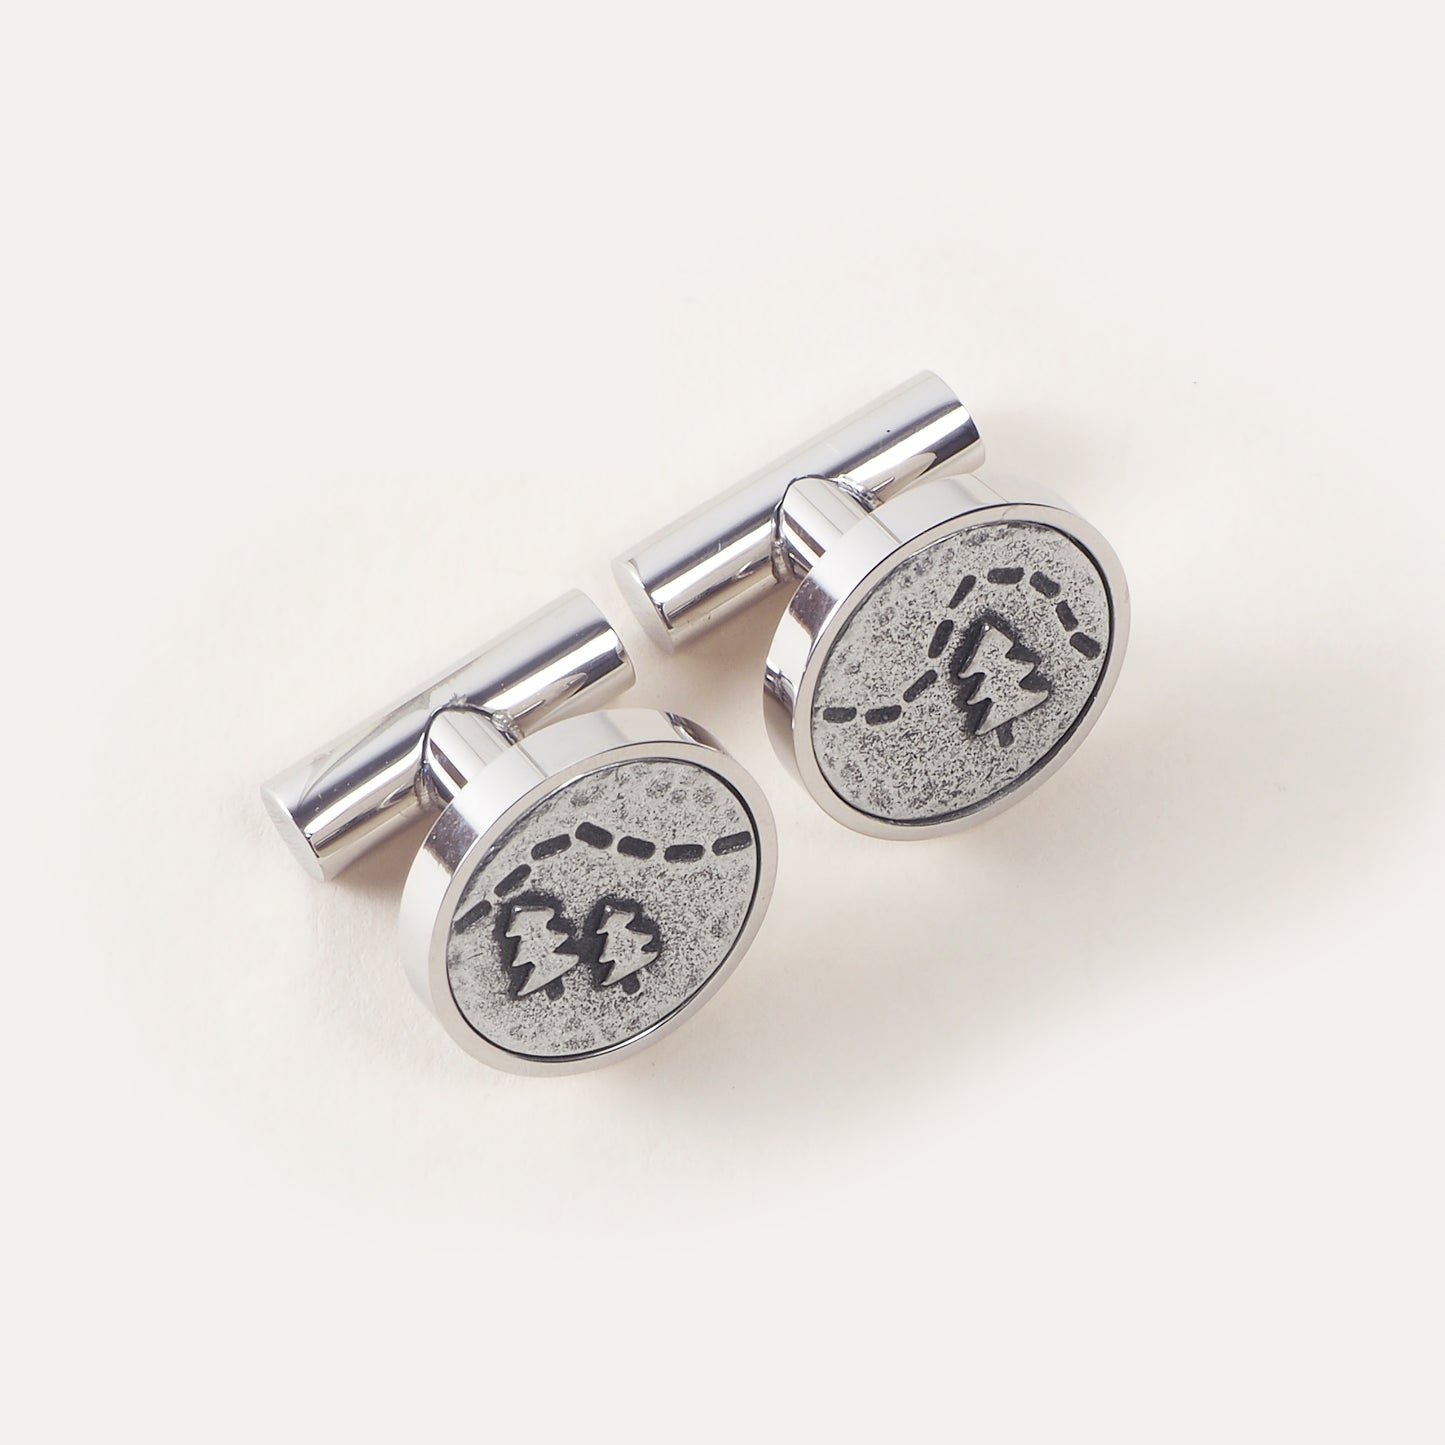 'Lost Without You' Cufflinks